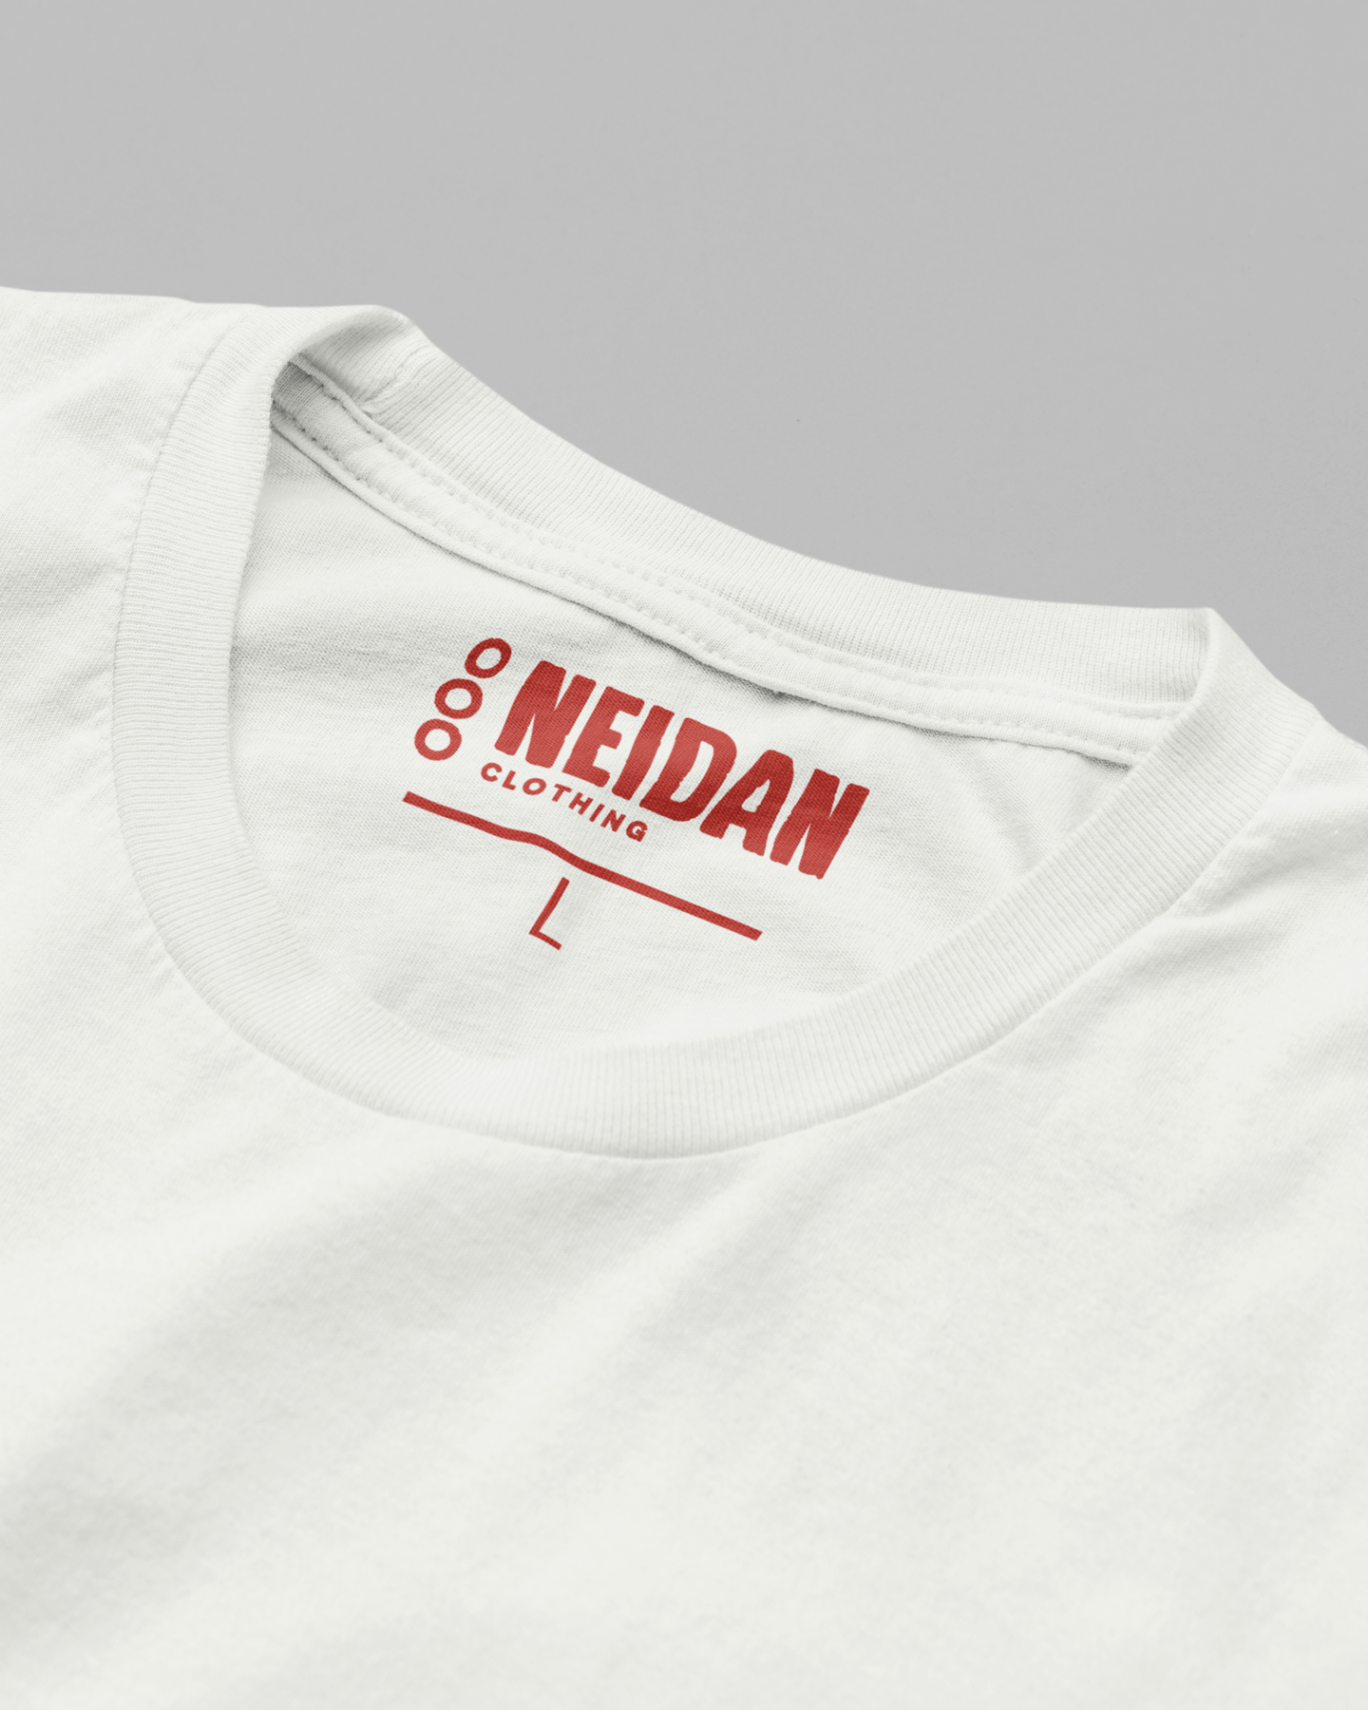 closeup of a white t shirt neck label with the neidan clothing logo